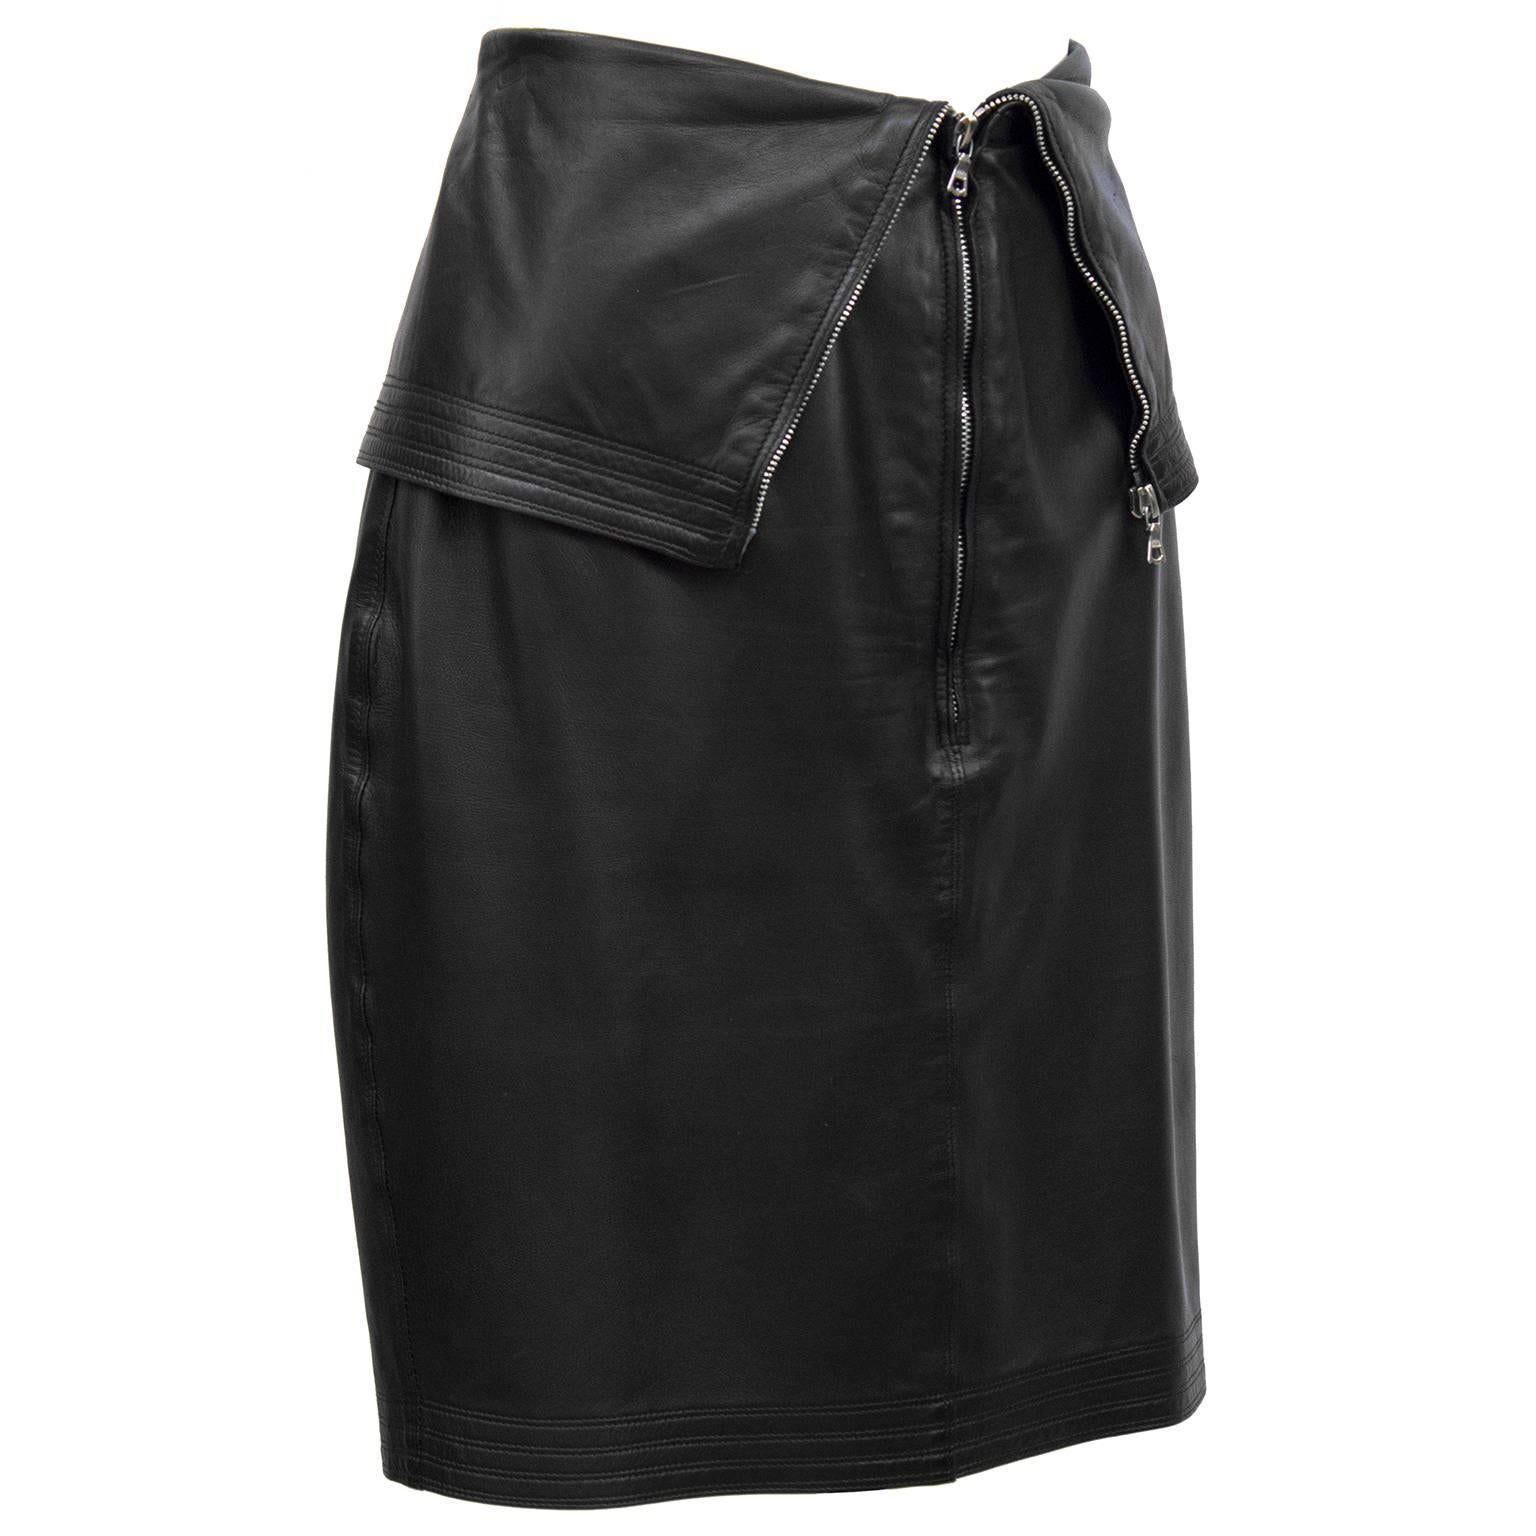 Classic 1980's Gianni Versace leather lambskin skirt. Buttery body conscious black leather with long silver zipper detail. Top of skirt folds down over hips or zipped up to below bust. Excellent vintage condition, fits like a US 4. 

Waist 28"